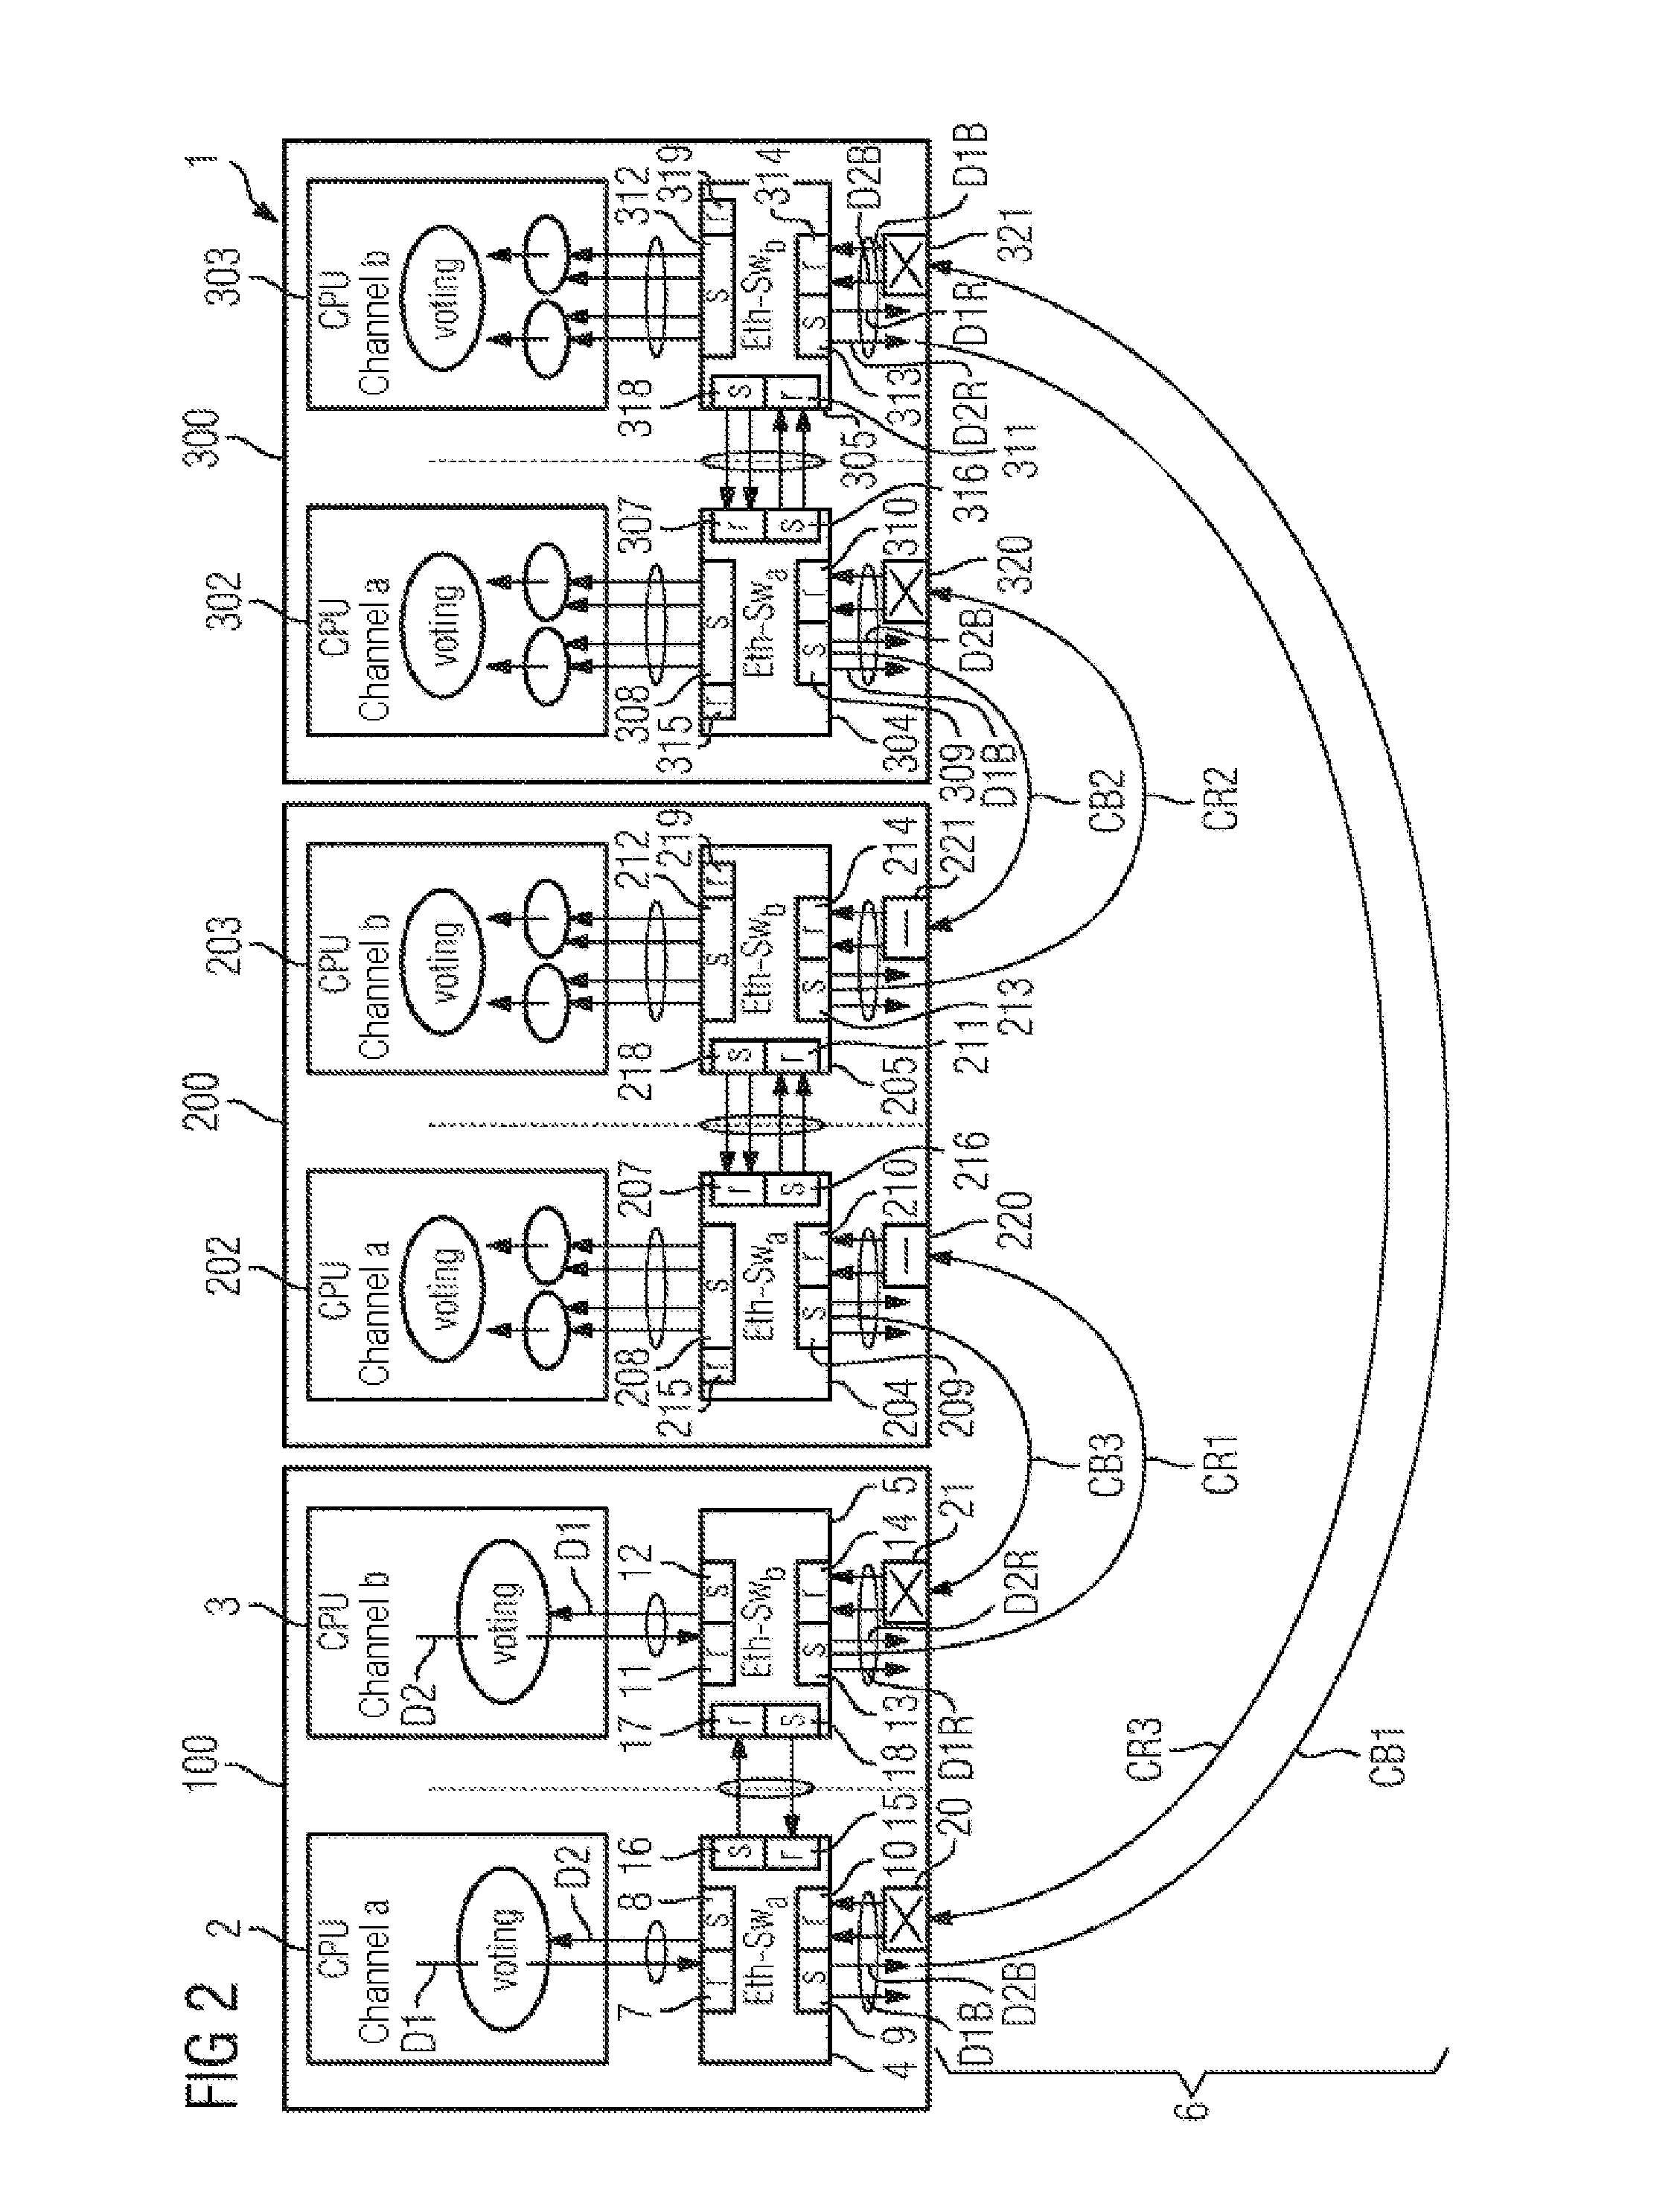 Method for operating a communications network and network arrangement